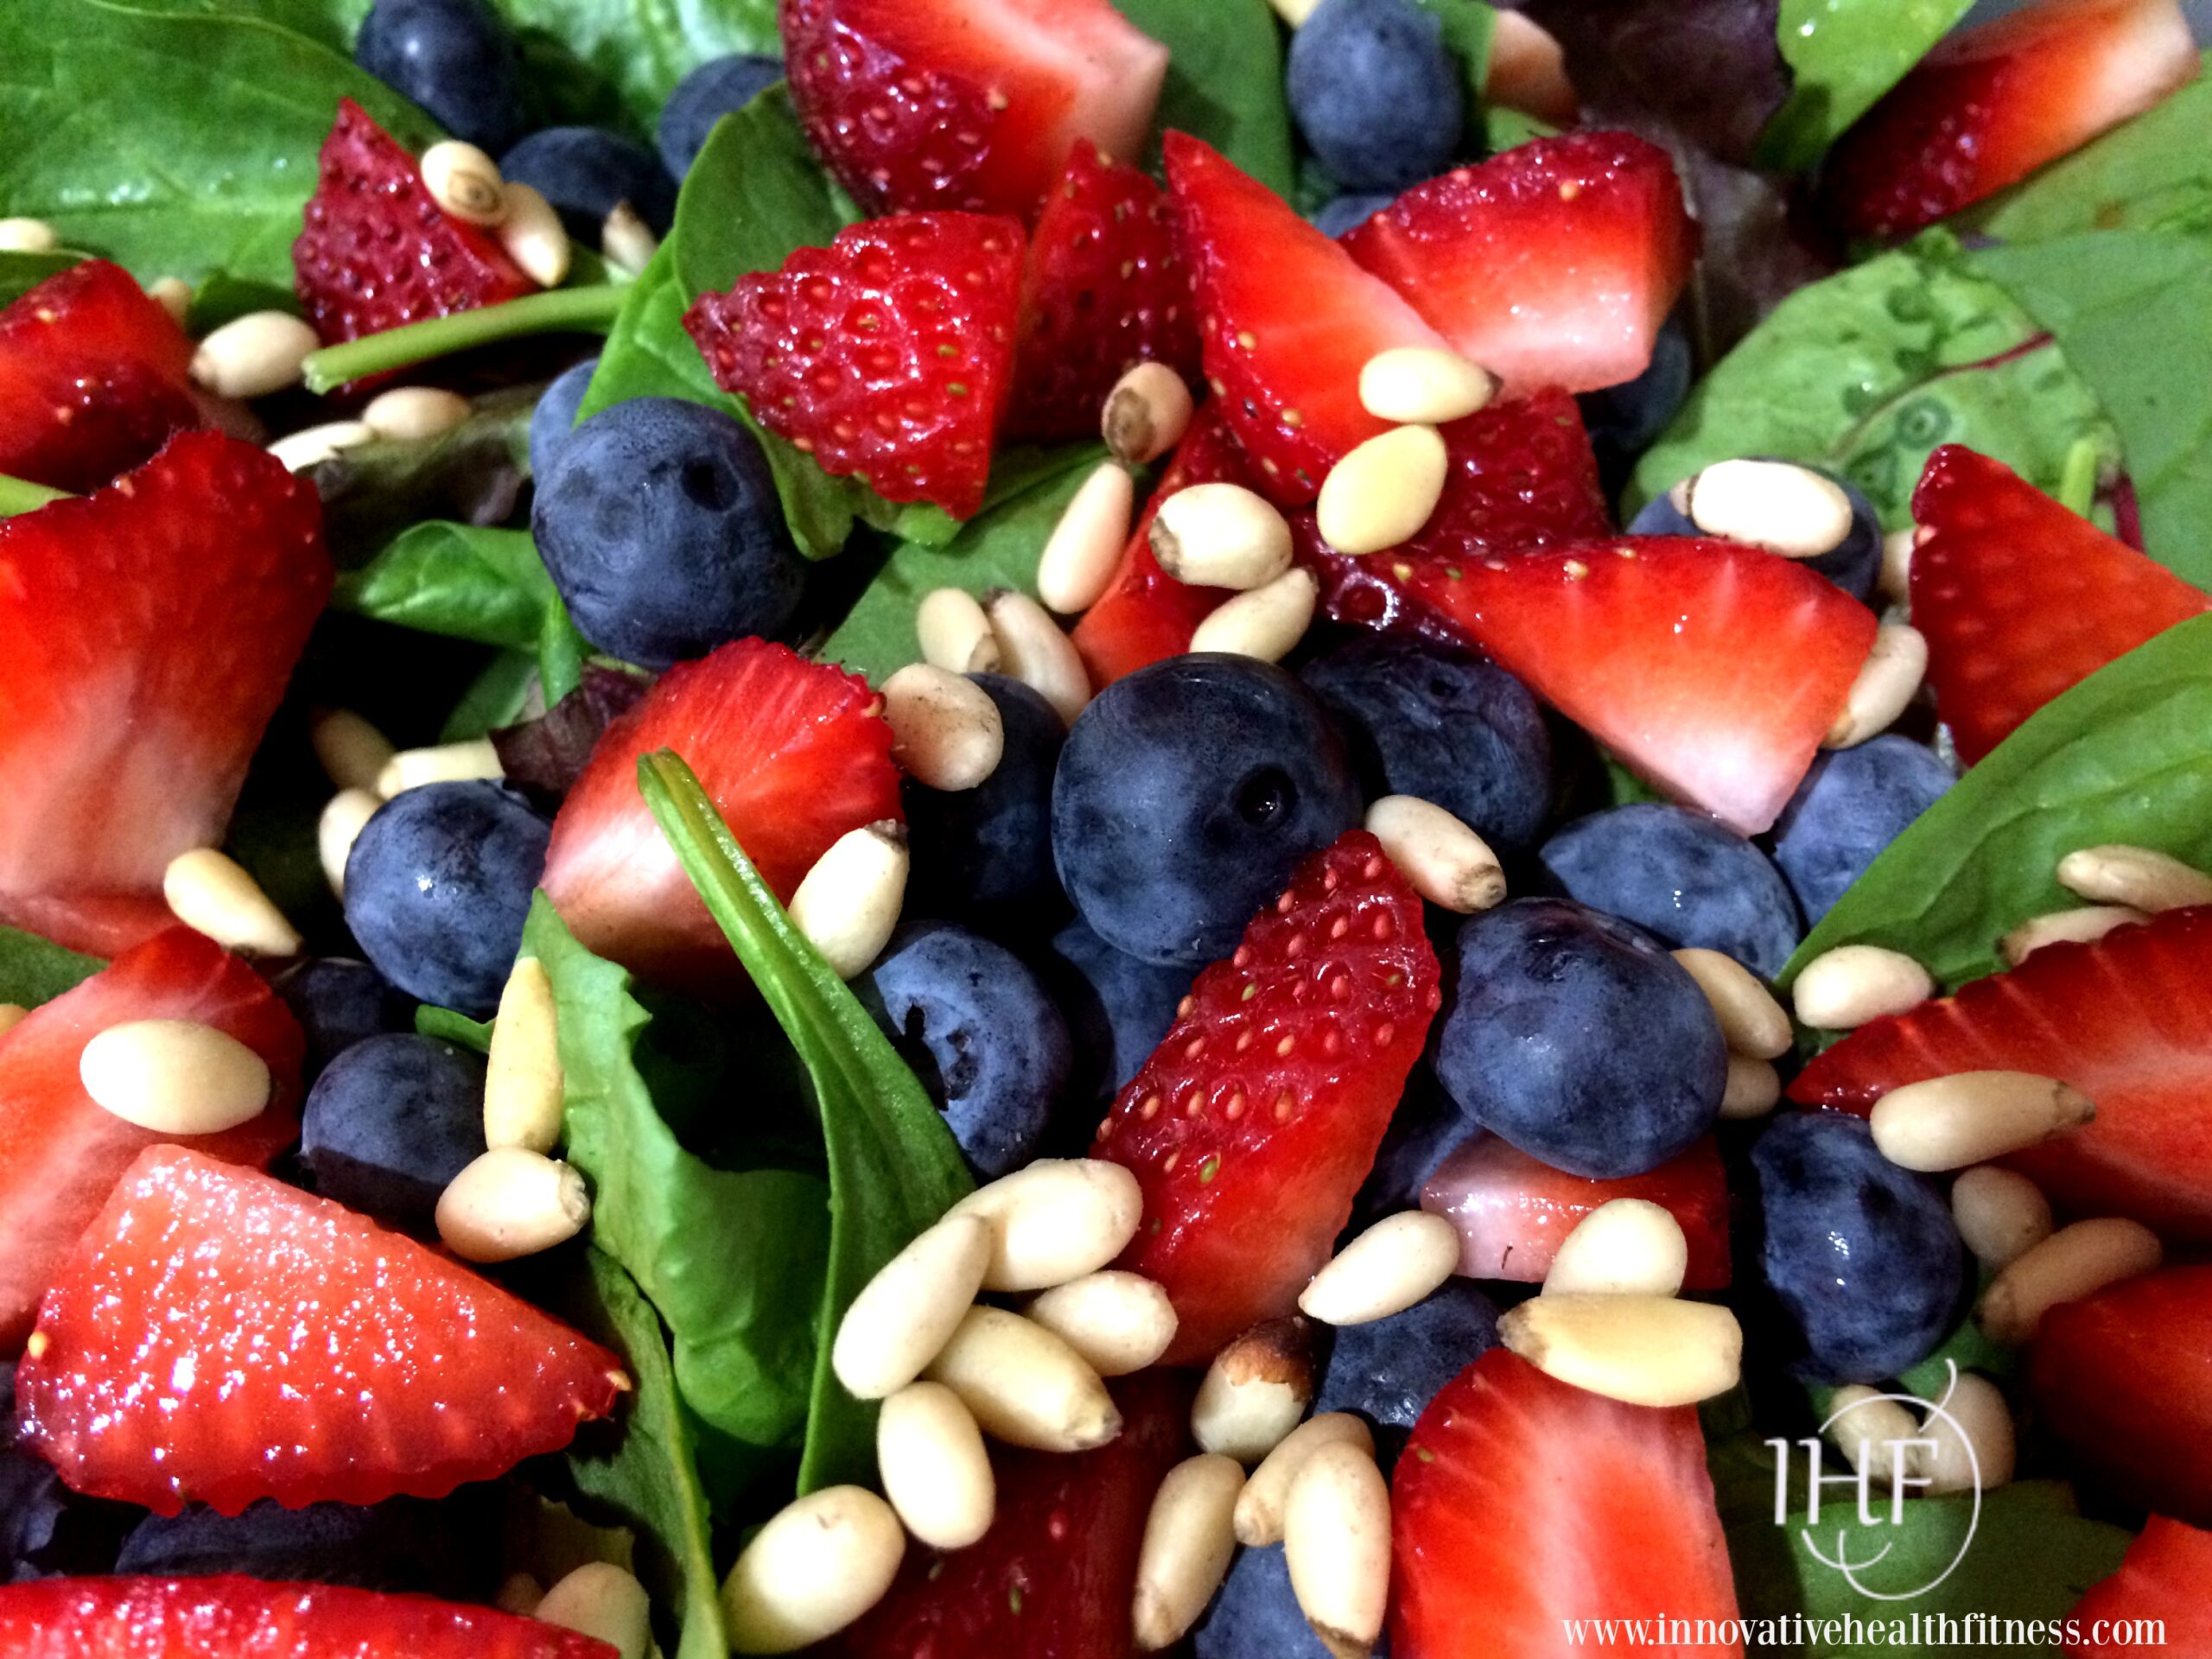 spinach salad topped with strawberries, blueberries and pine nuts